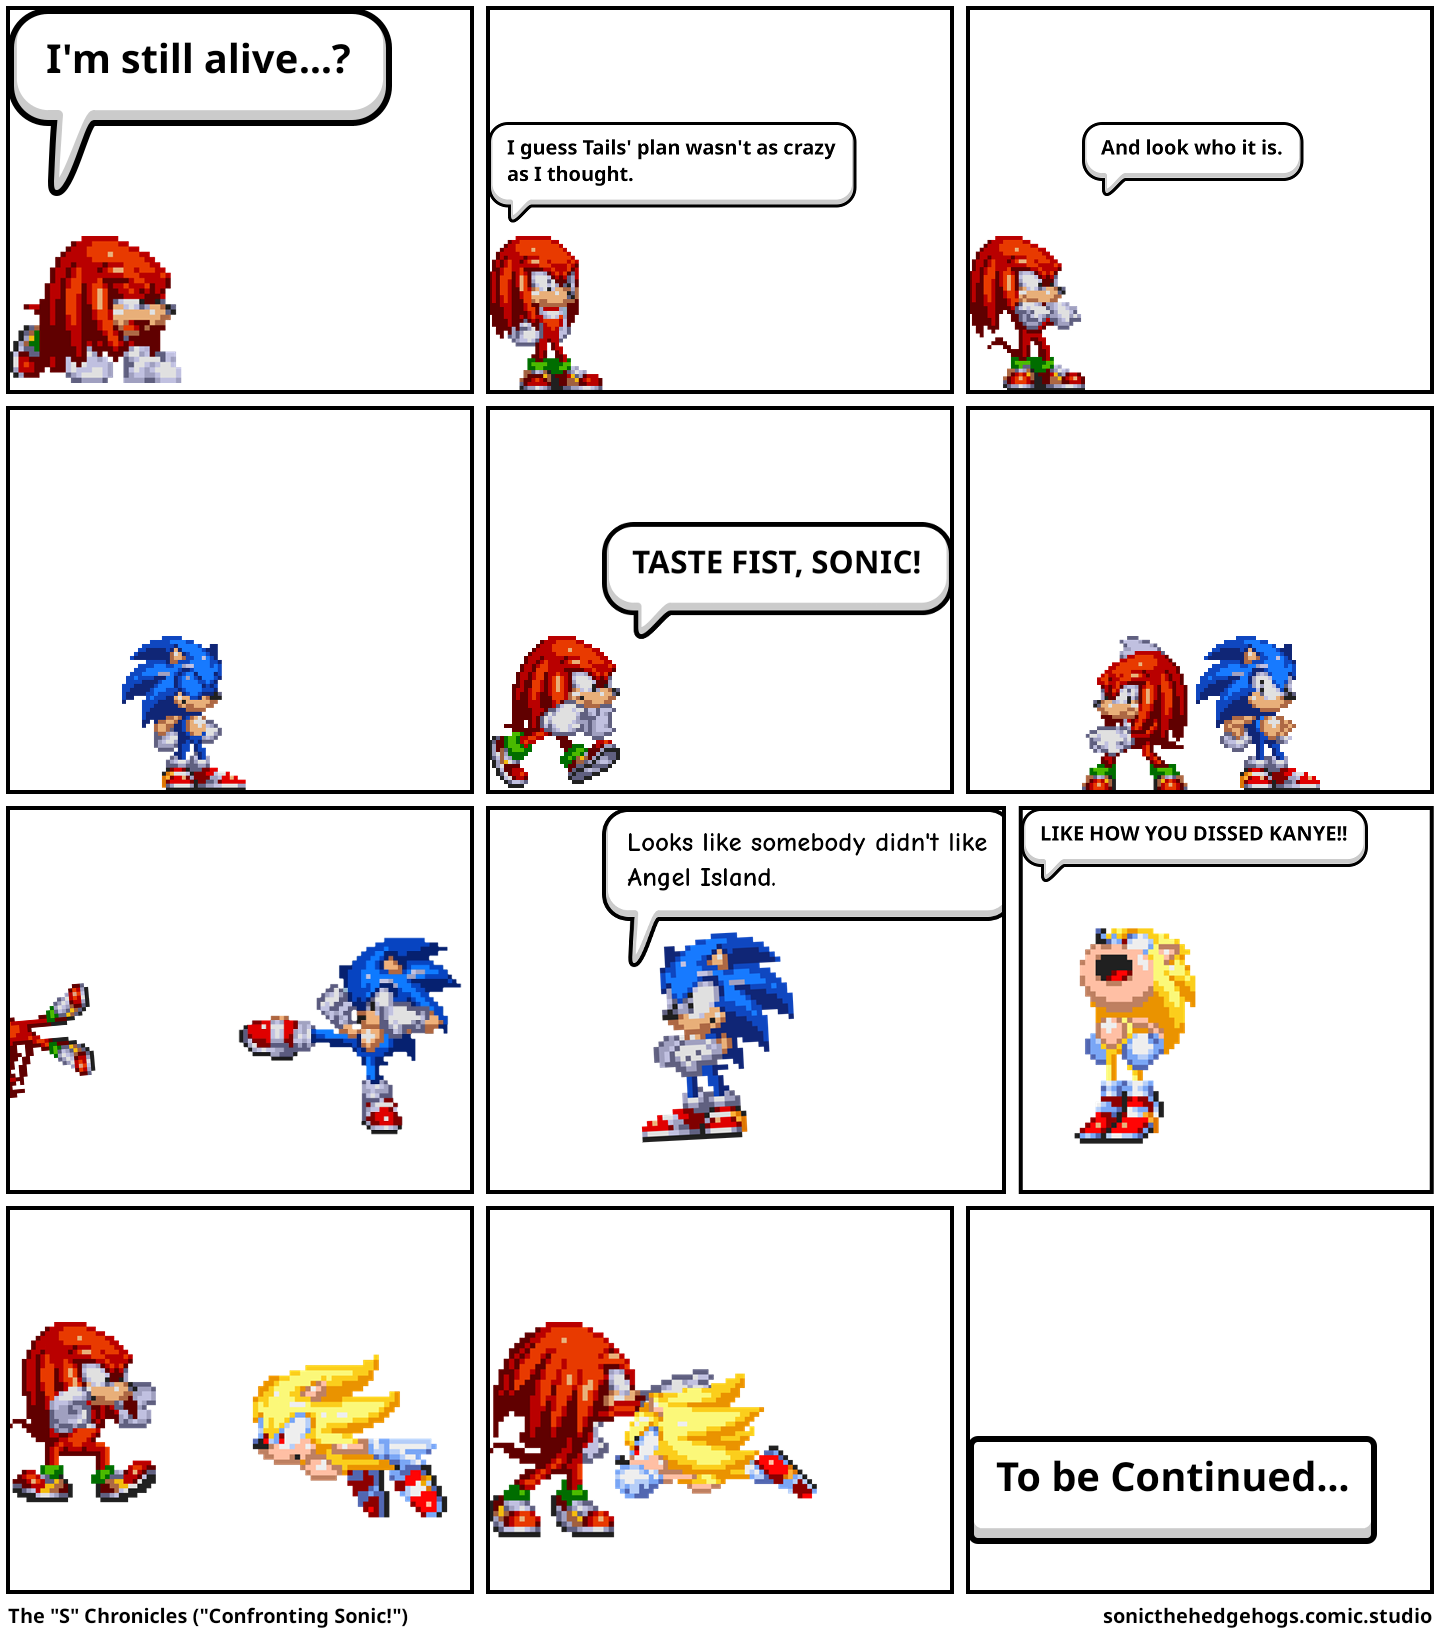 The "S" Chronicles ("Confronting Sonic!")